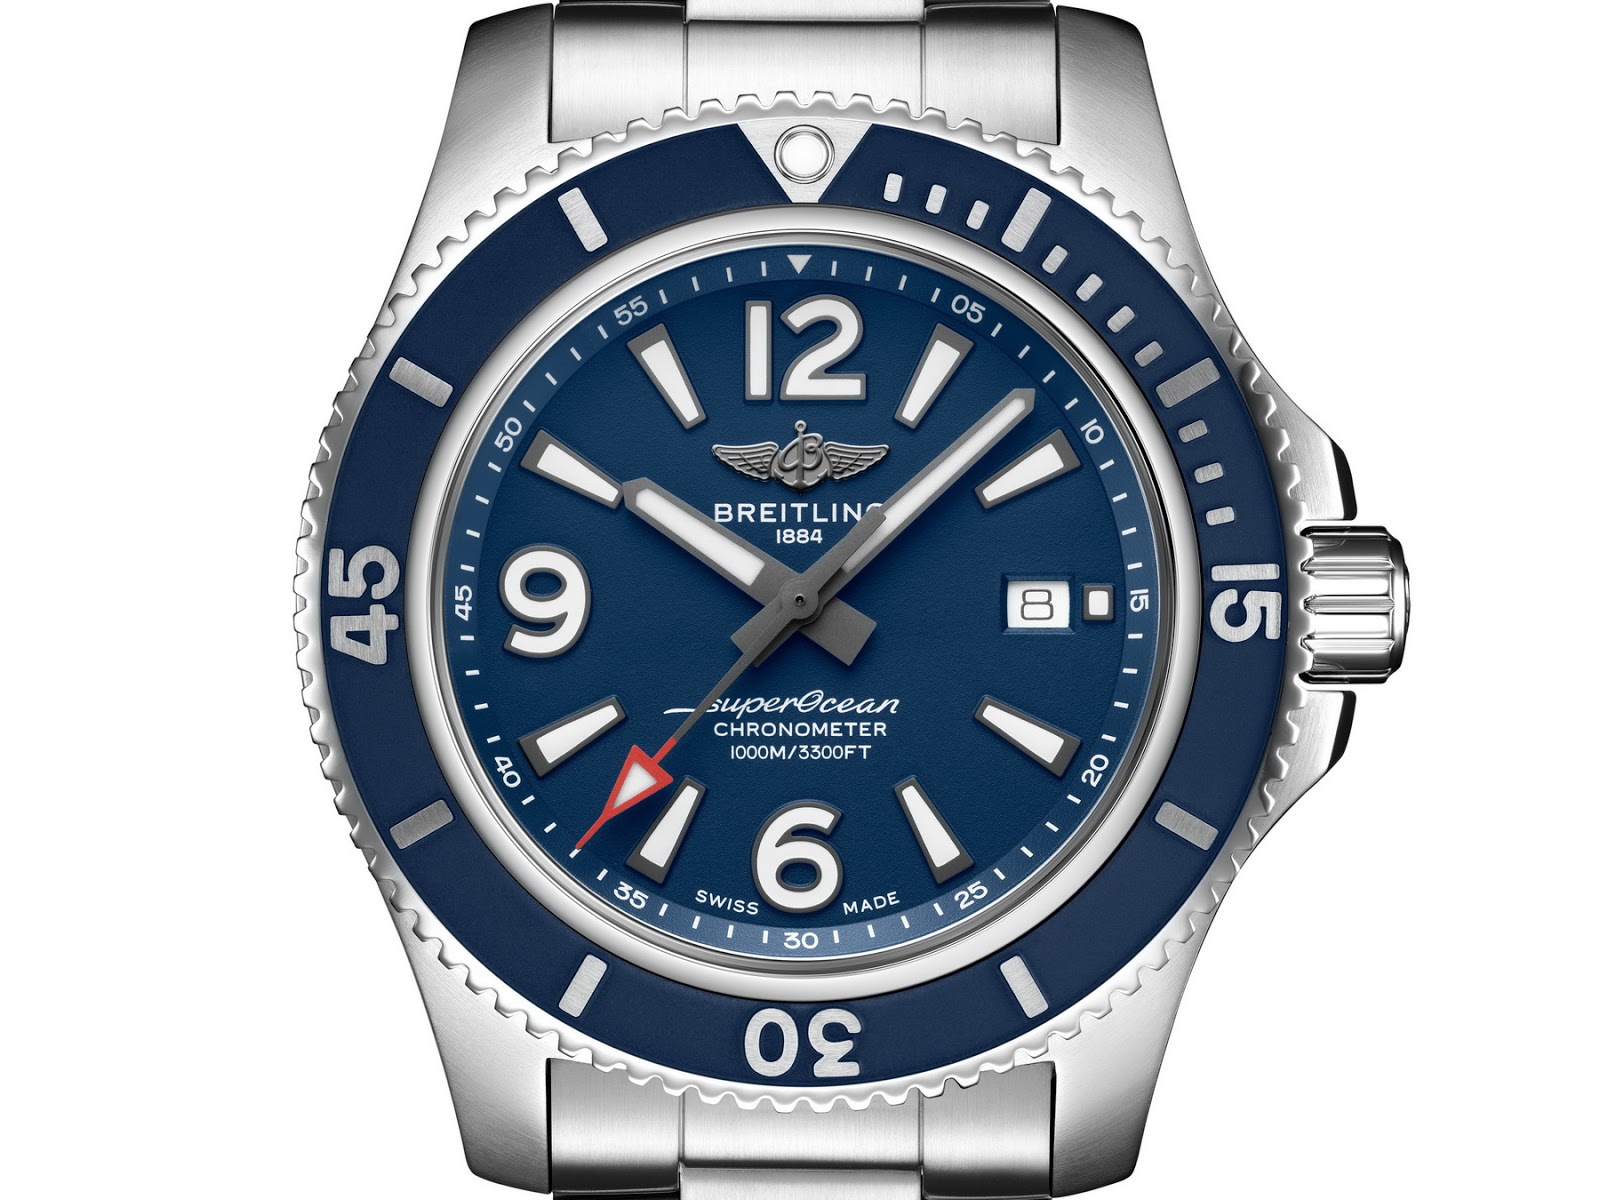 Breitling's newest from Baselworld 2019 BREITLING%2BSuperocean%2B44%2B05